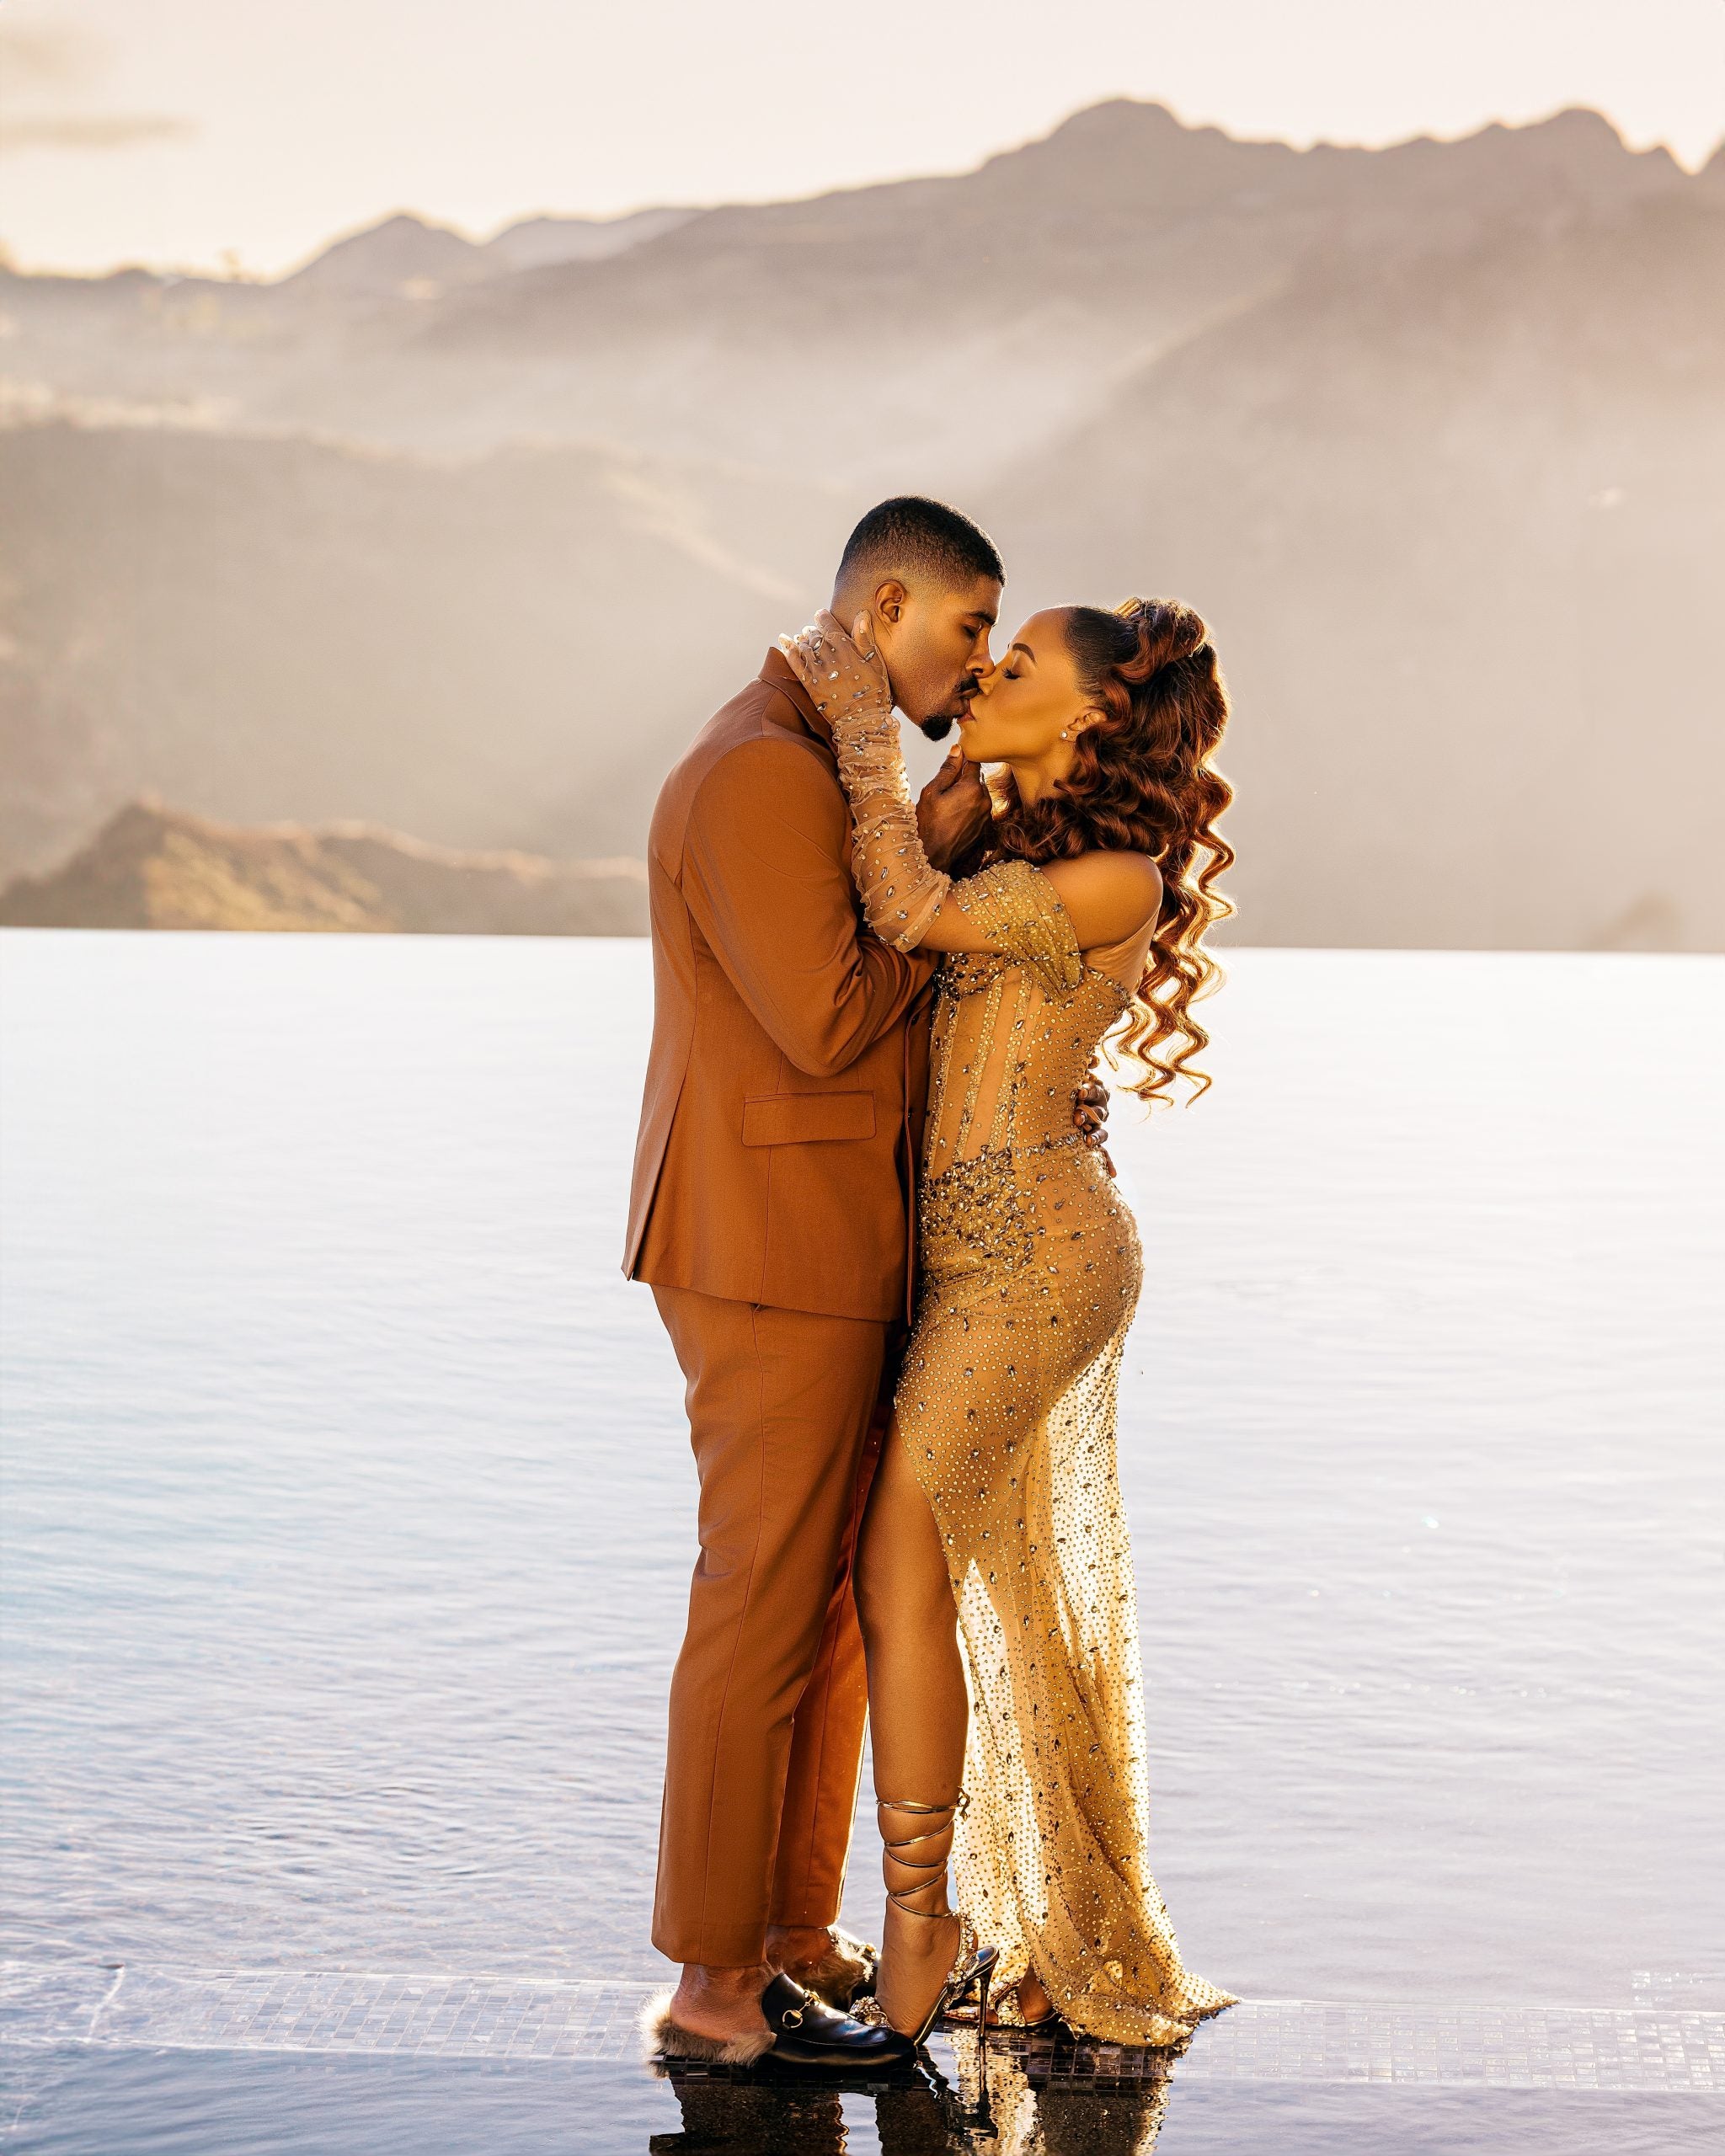 Exclusive: See BET Stars KJ Smith And Skyh Black’s Gorgeous Engagement Shoot